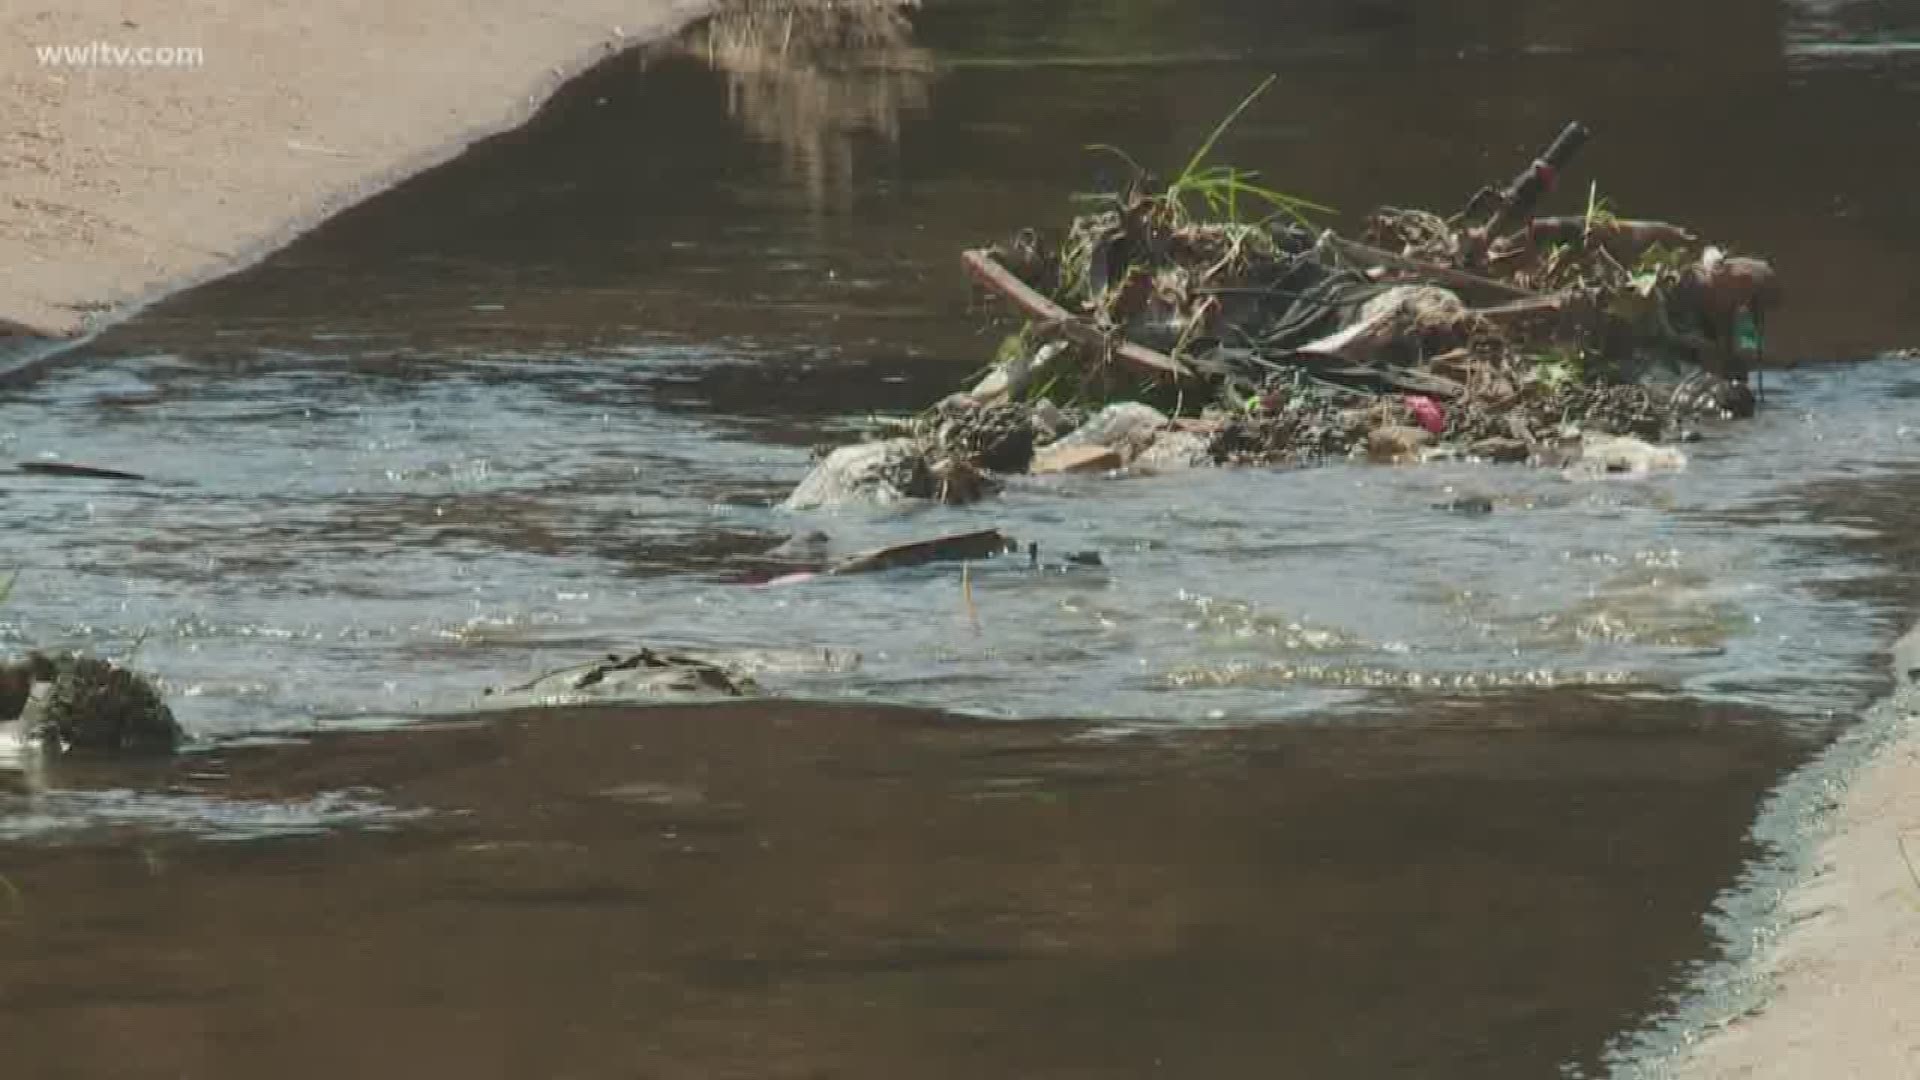 Faced with major flooding issues and seemingly no end in sight, residents are taking it upon themselves to clean up drainage canals.